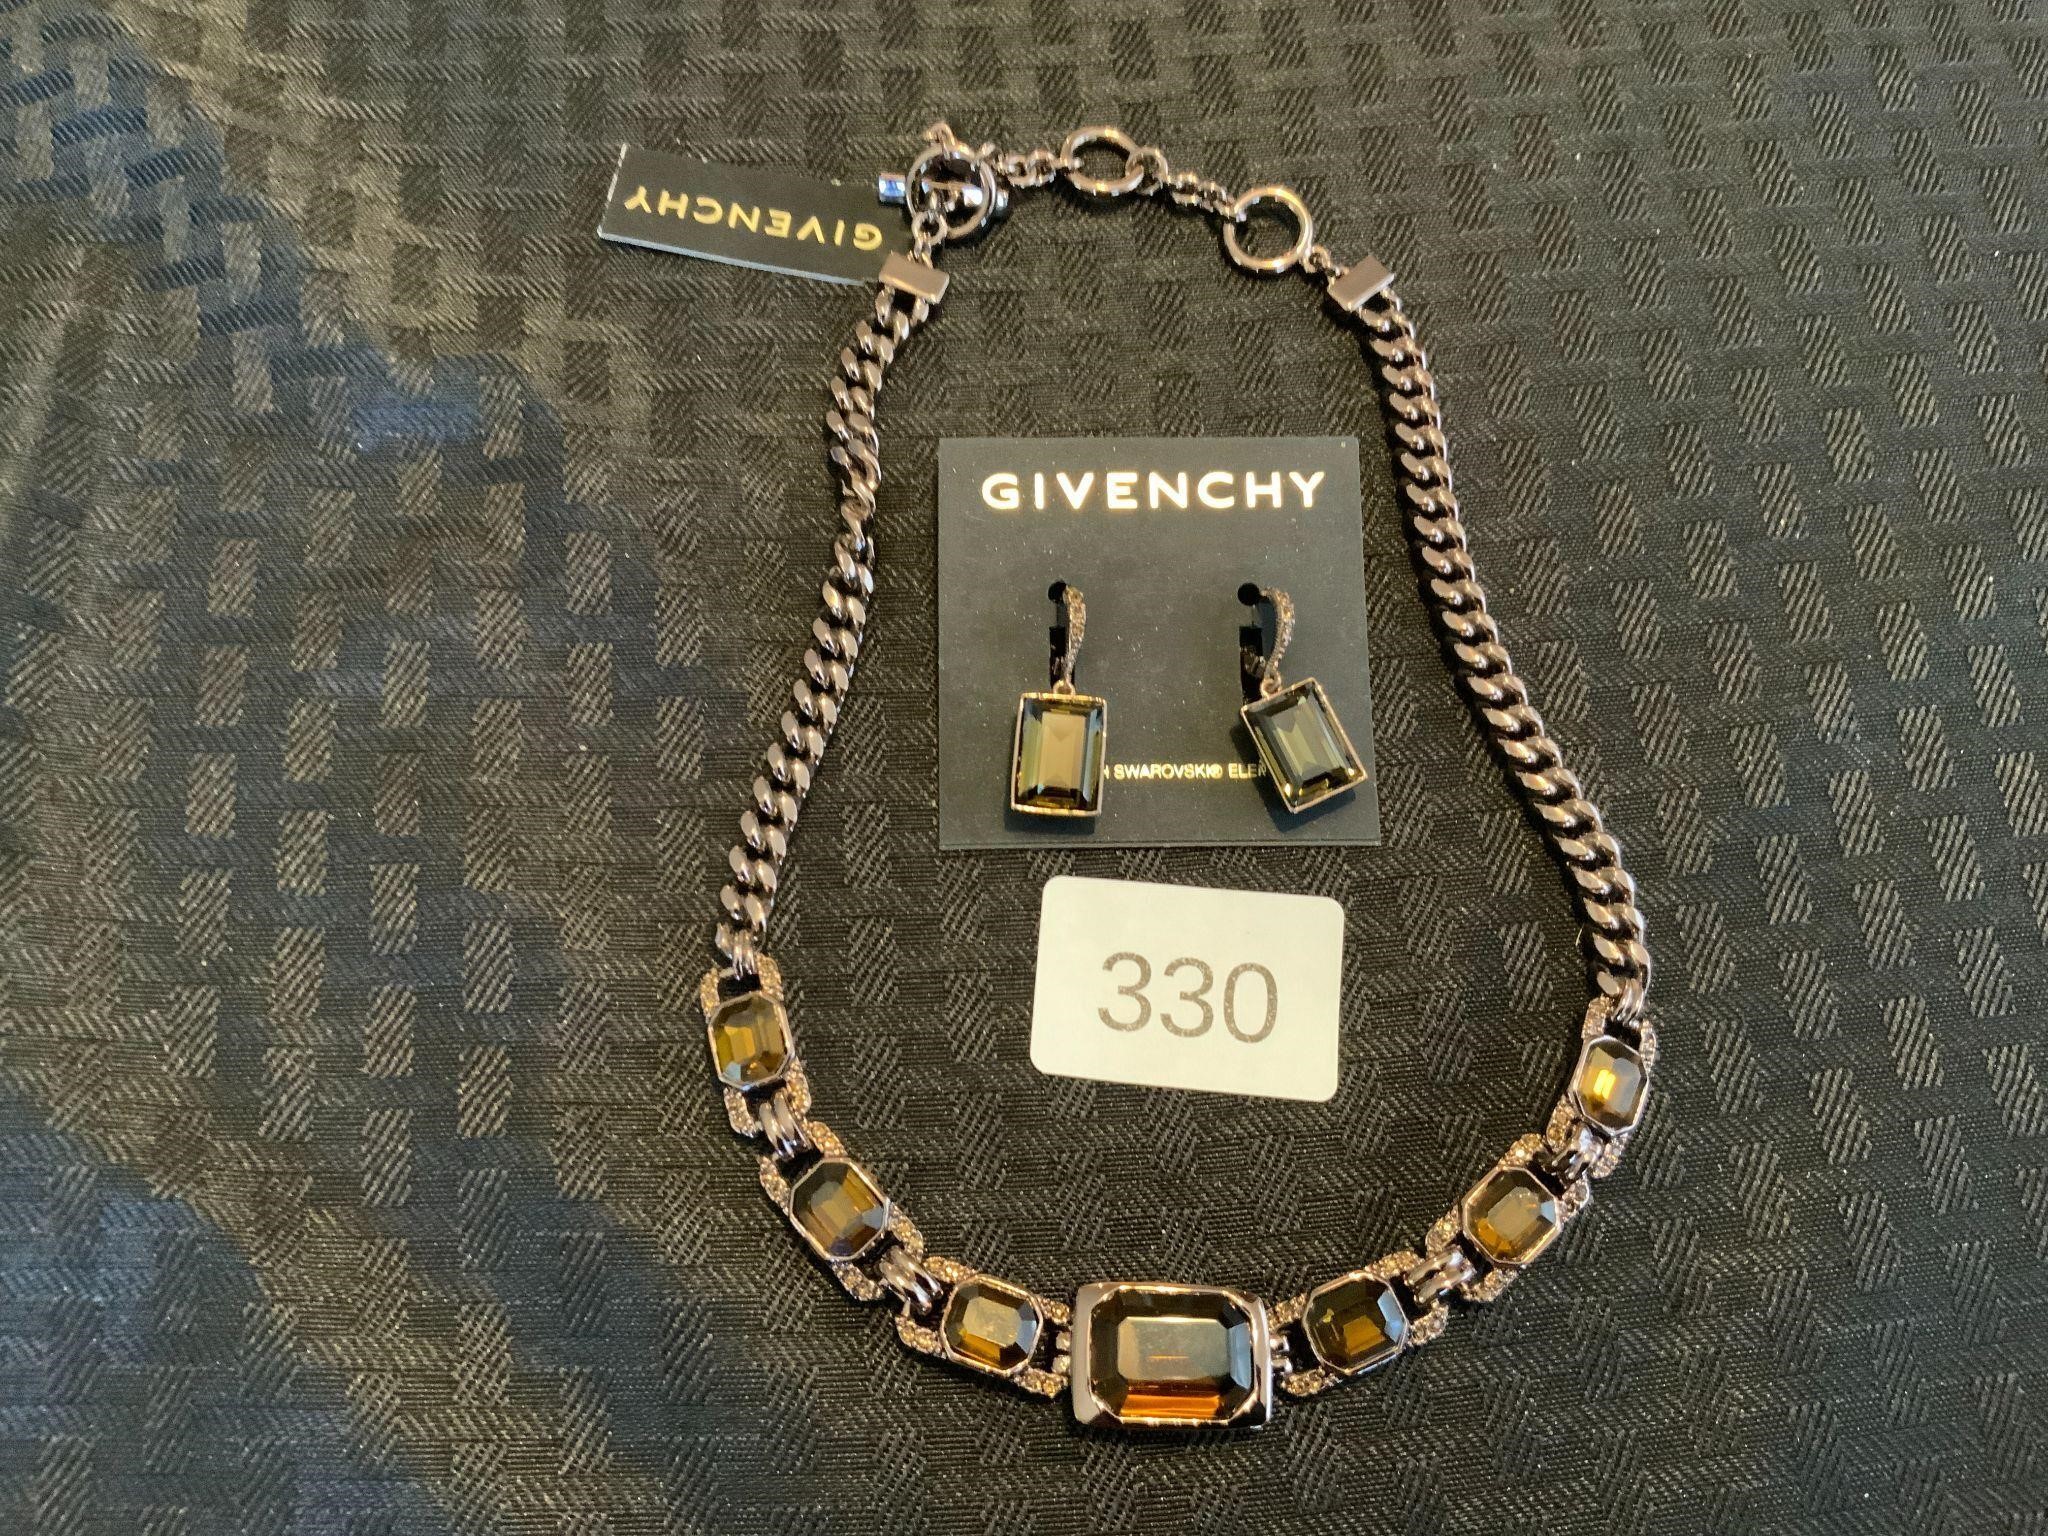 Givenchy Necklace & Earrings Swarovski Elements